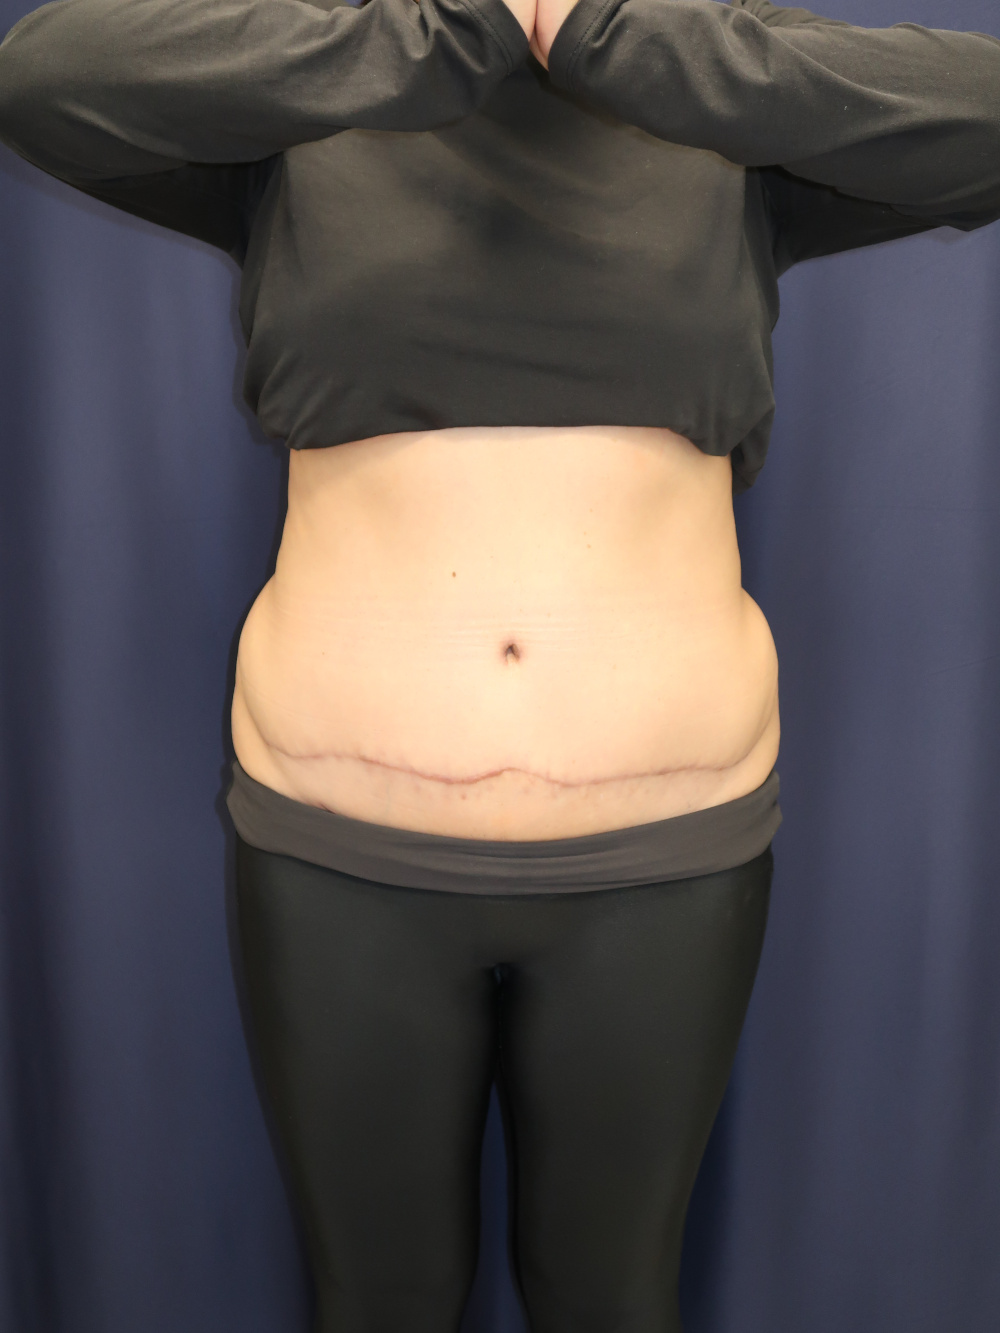 Abdominoplasty (Tummy Tuck) Patient Photo - Case 3743 - after view